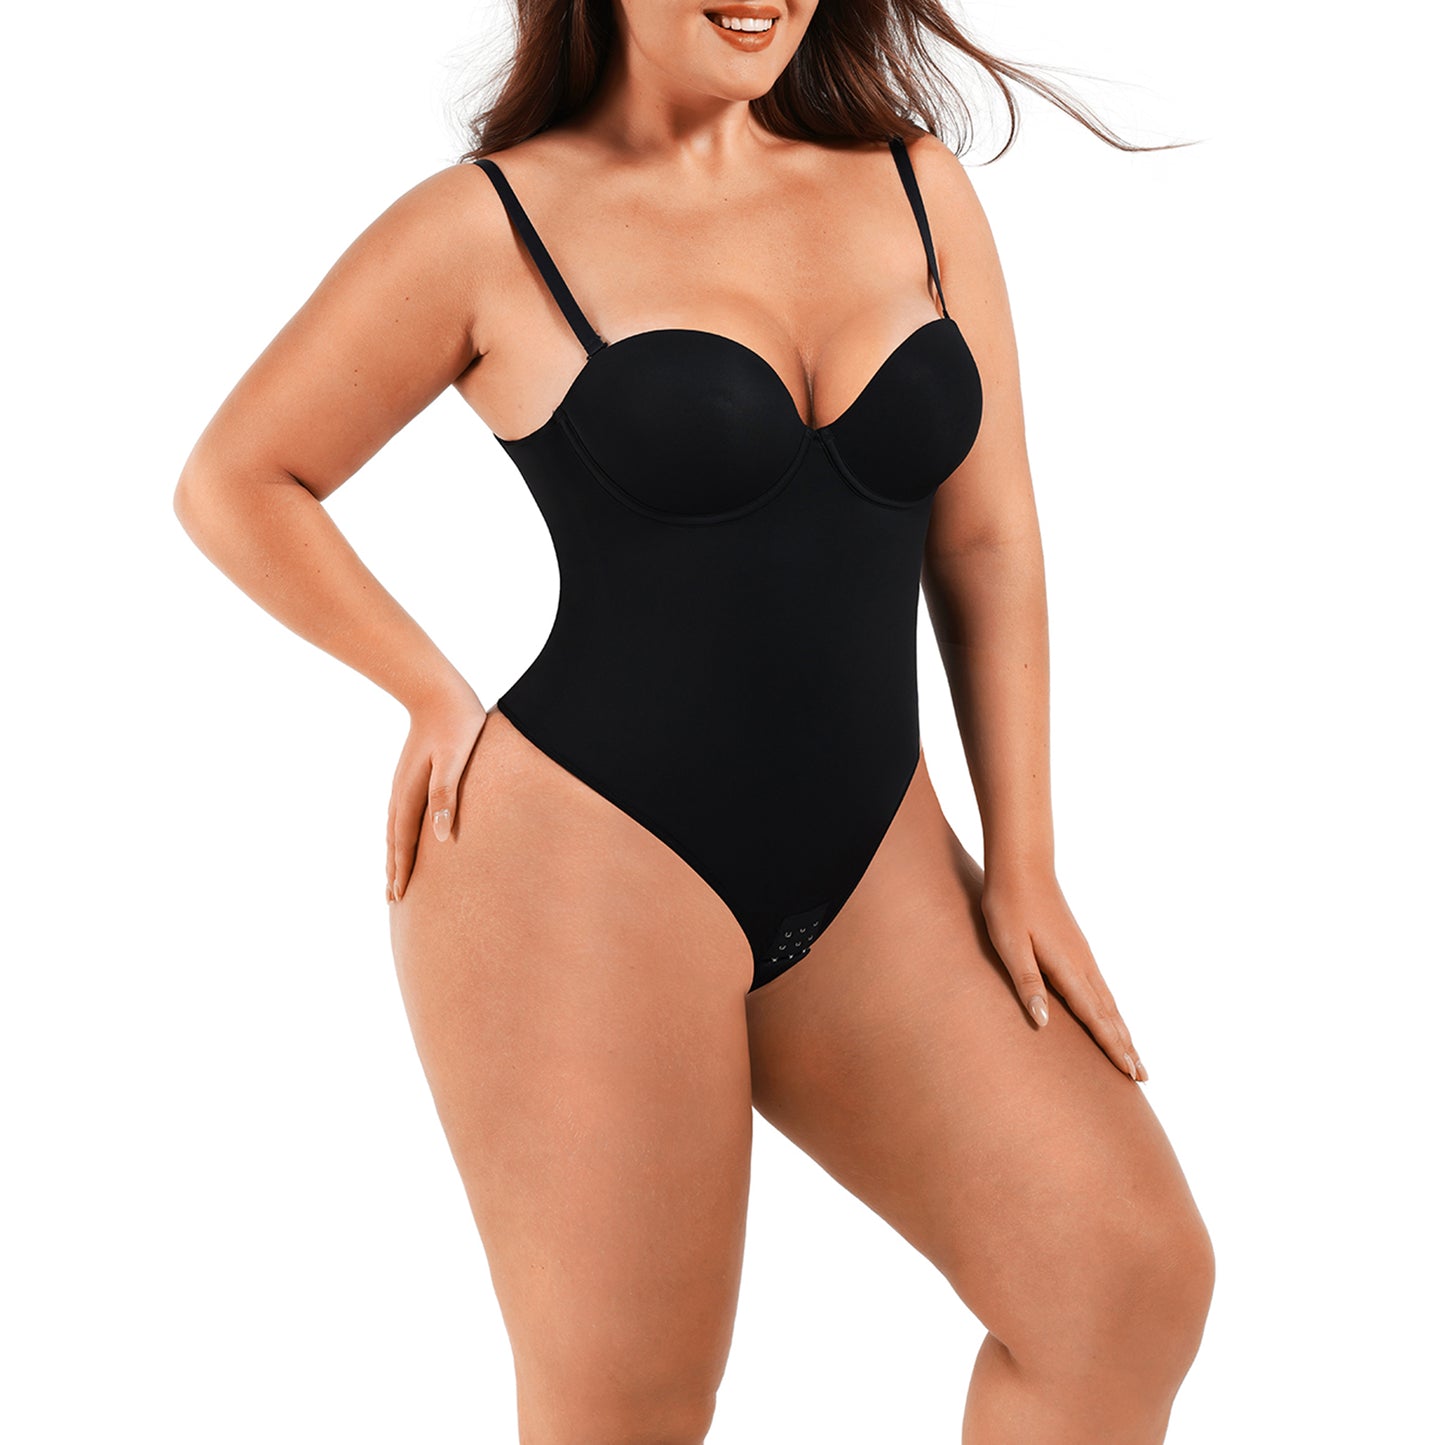 Classic Black Underwire Bustier Shaping Bodysuit